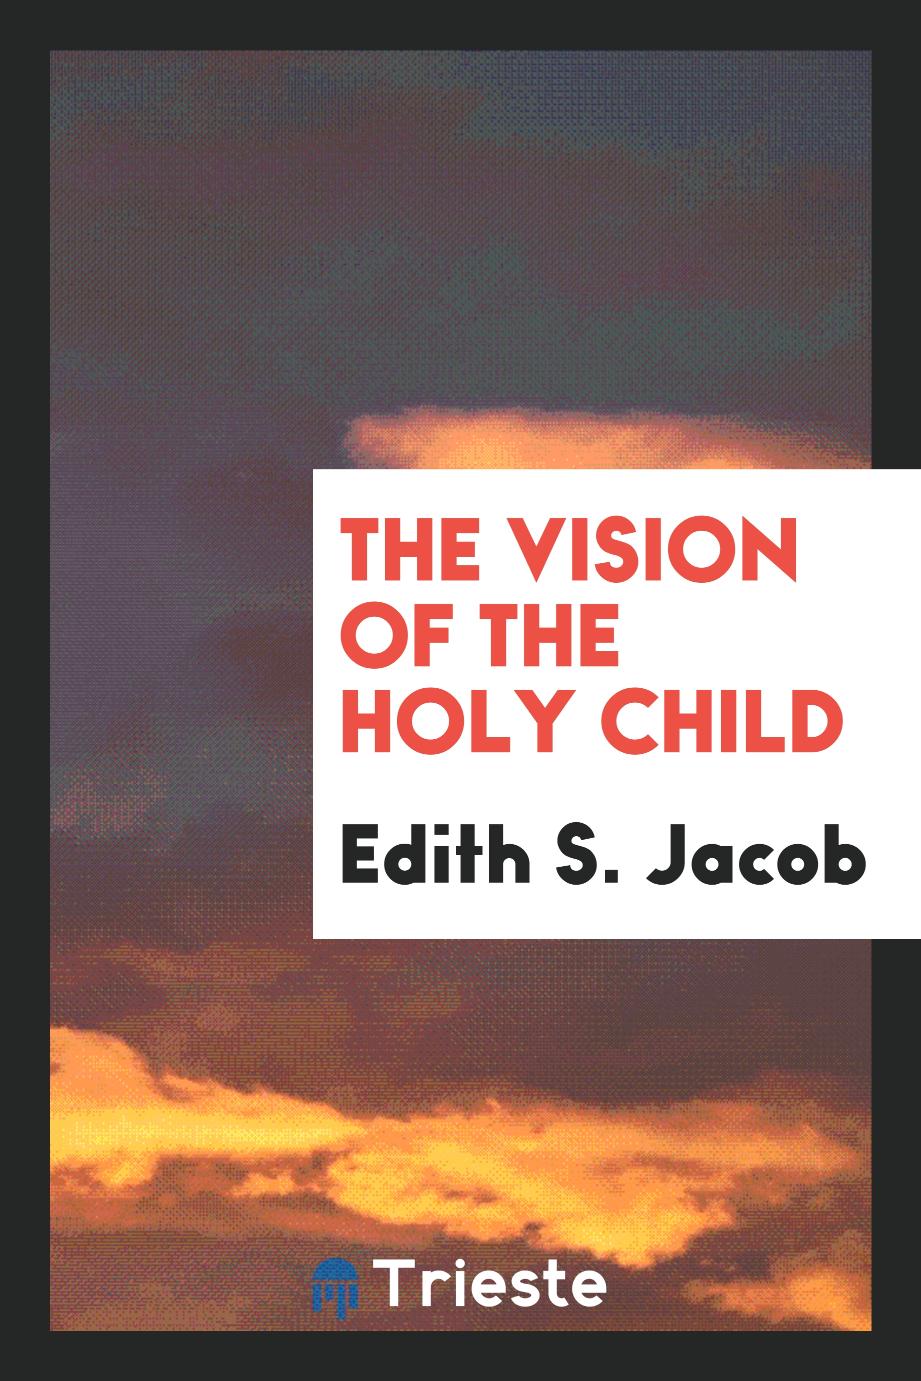 The vision of the holy Child